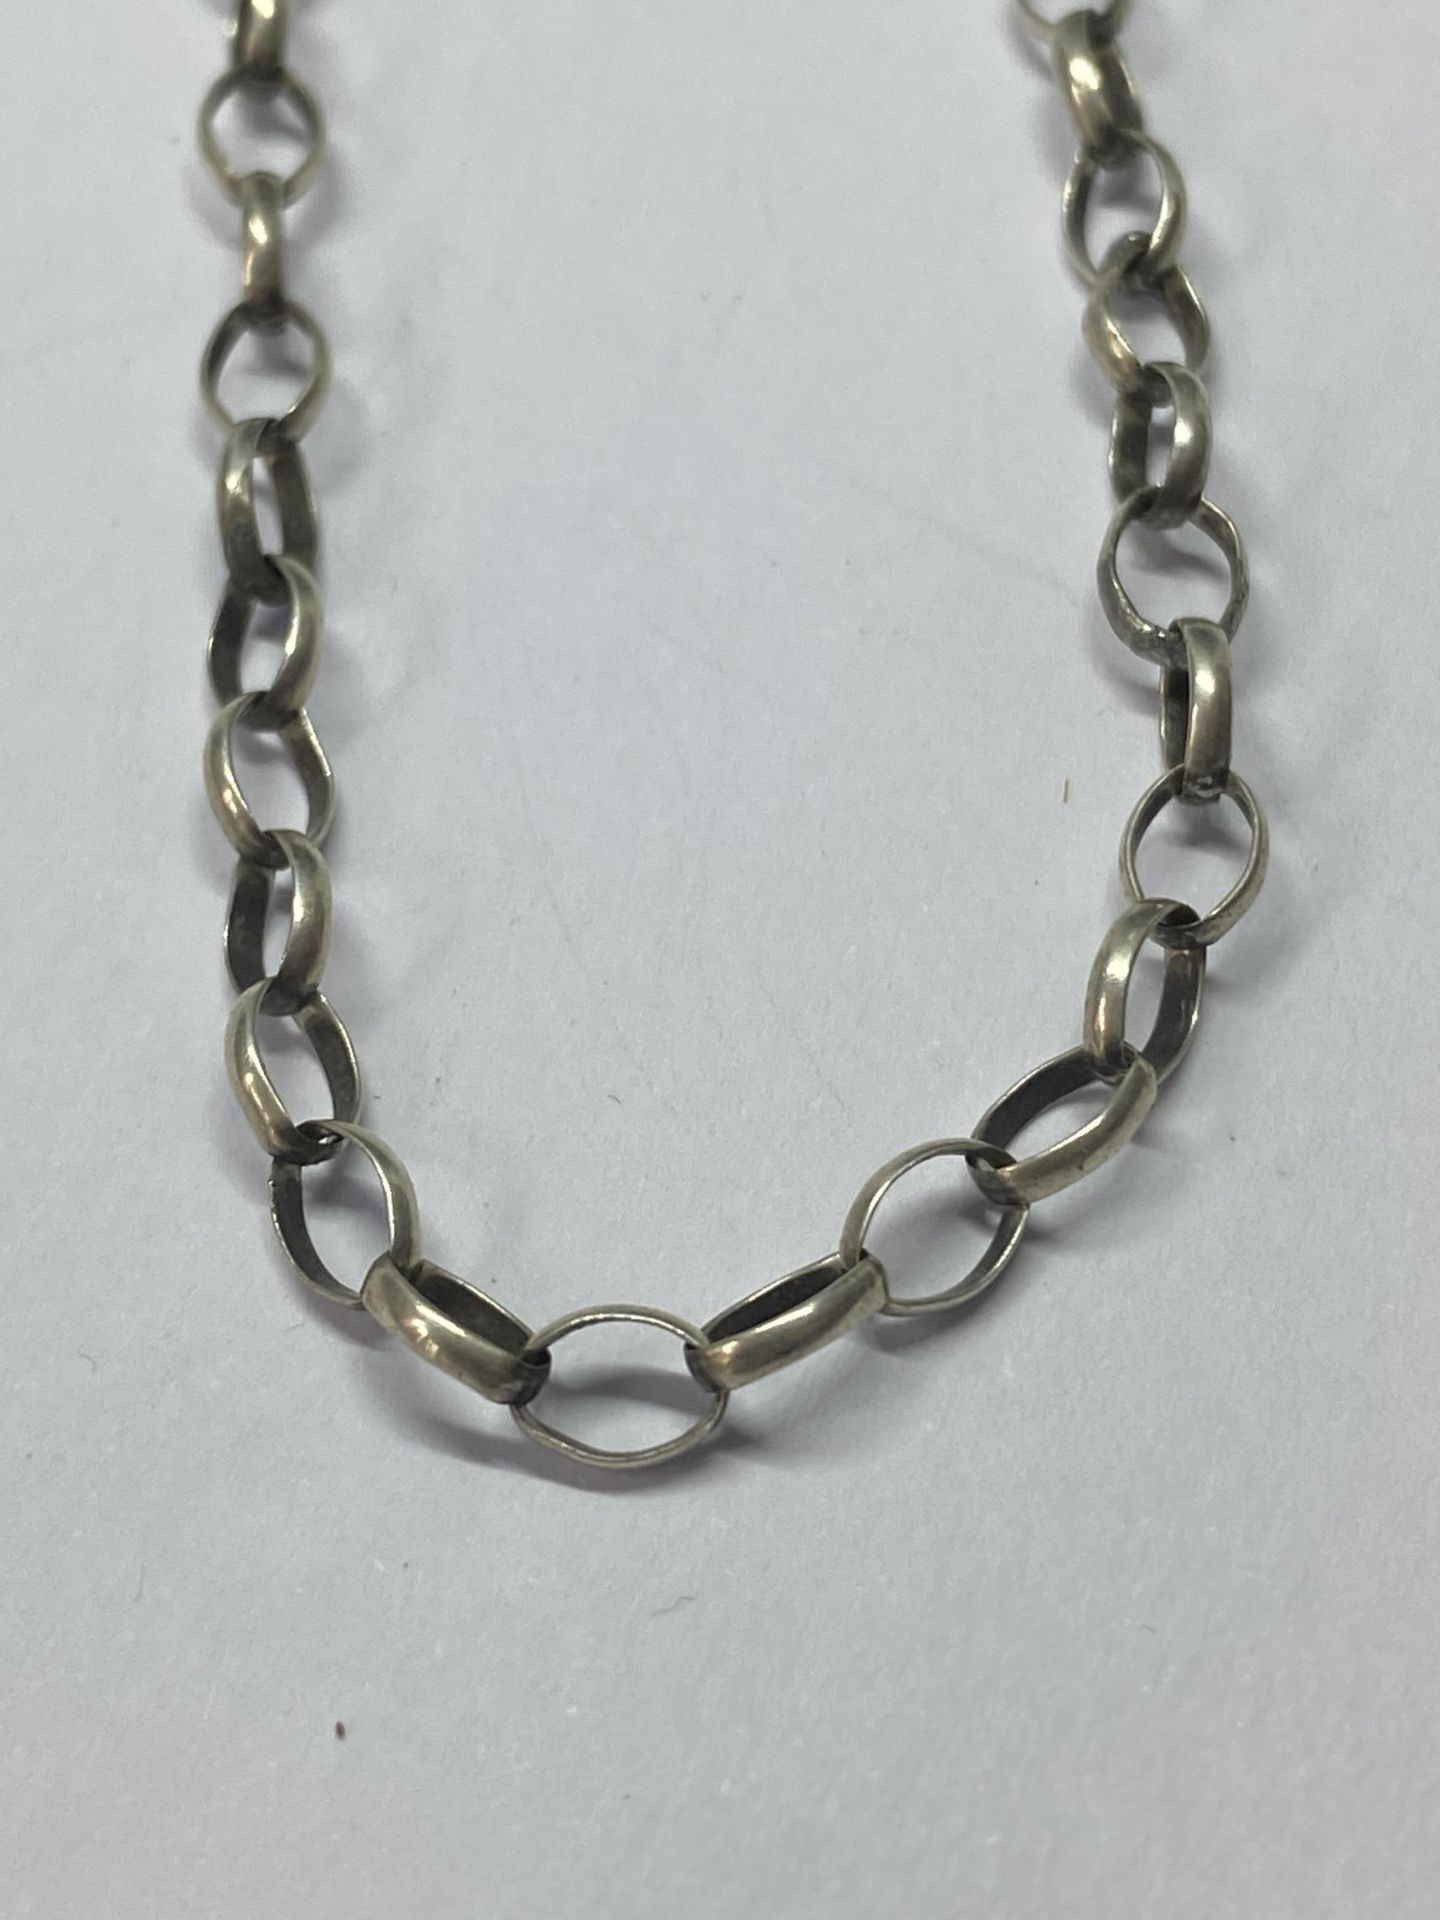 A SILVER BELCHER CHAIN - Image 2 of 3